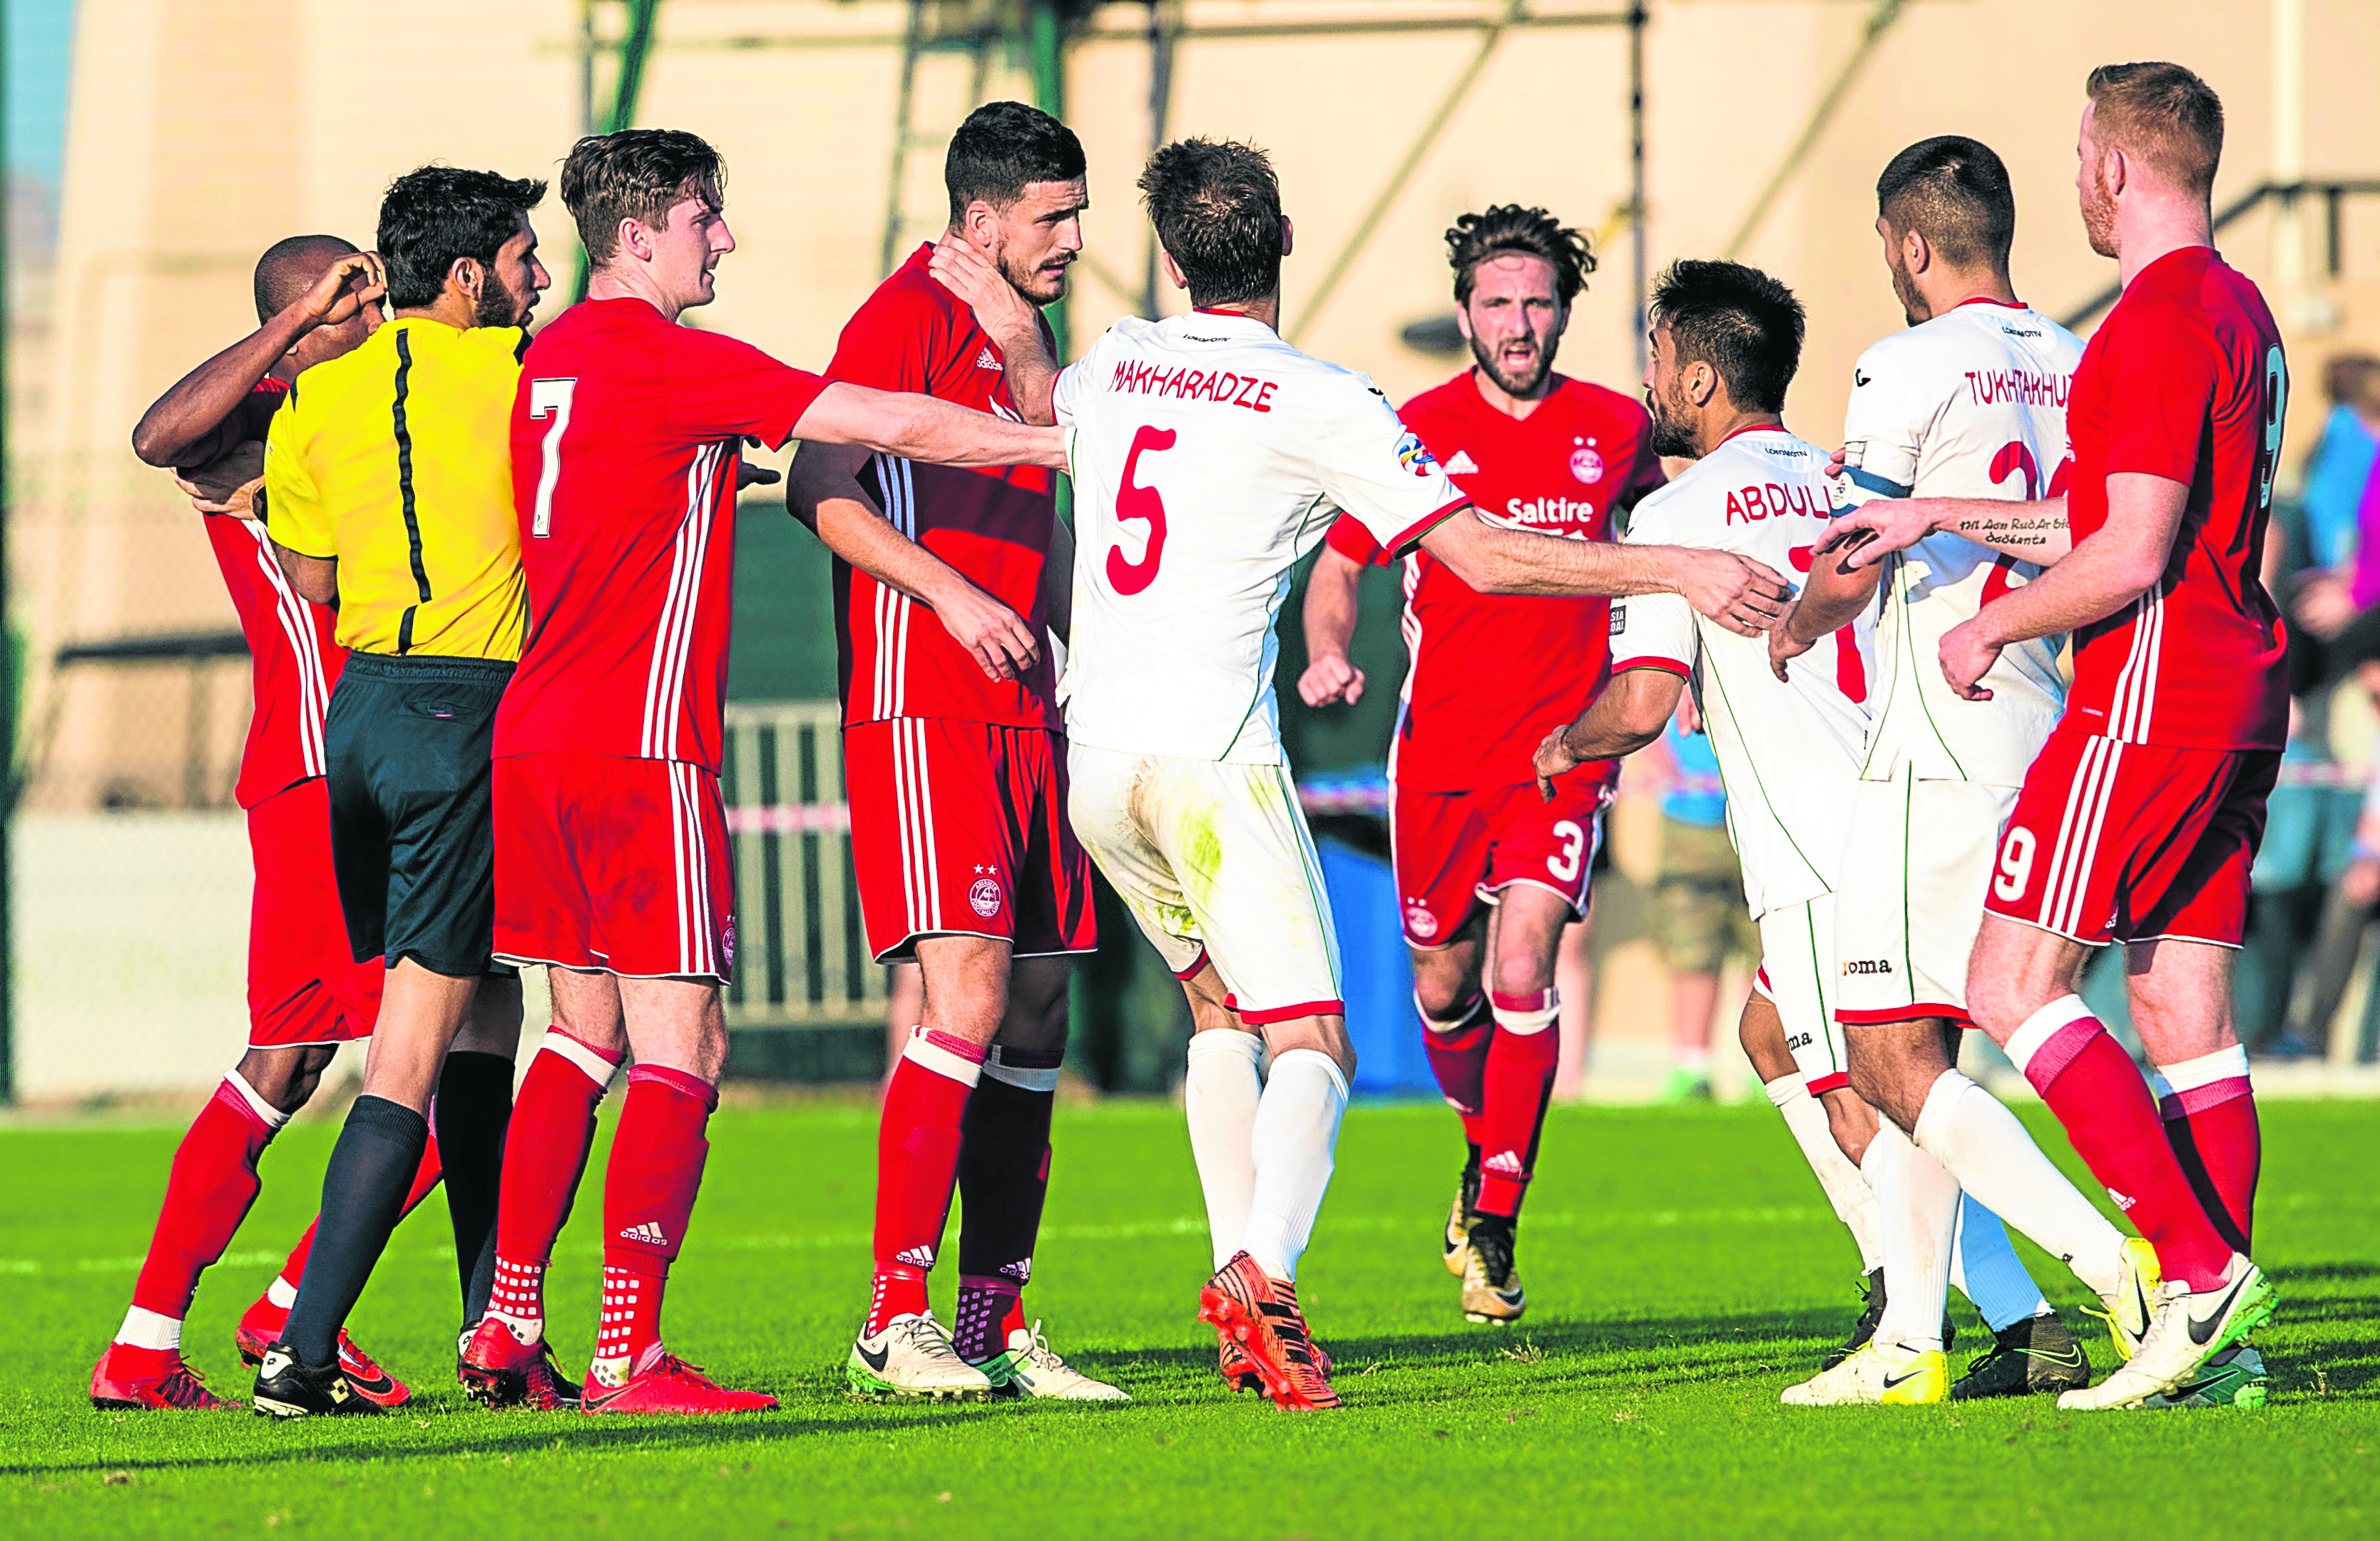 Aberdeen's Anthony O'Connor and Kaki Makharadze have an altercation.